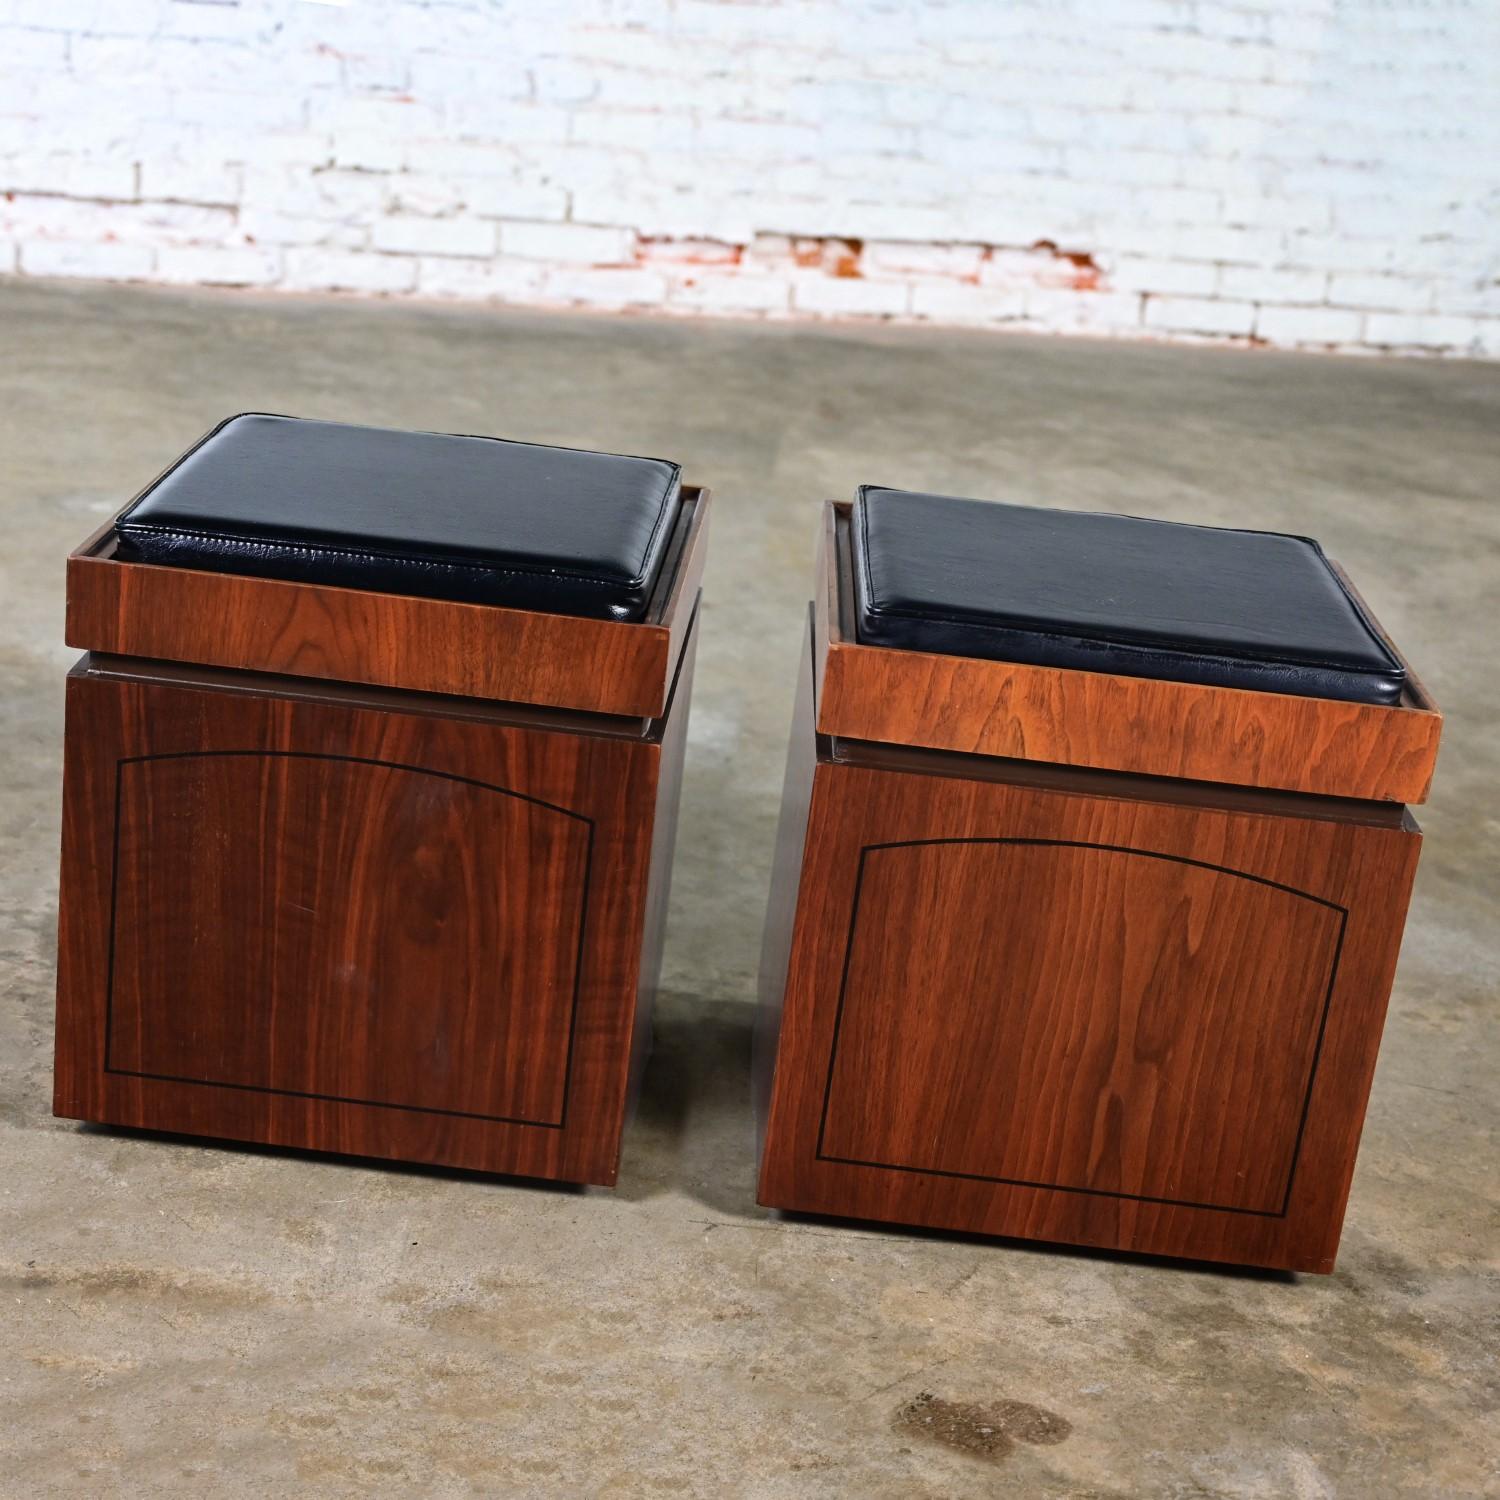 Awesome vintage Mid-Century Modern Lane Style No. 997-87 rolling cube storage ottoman walnut veneered cedar lined end tables with flip tabletop game board on one side black vinyl or faux leather upholstered on the other side, a pair. Beautiful